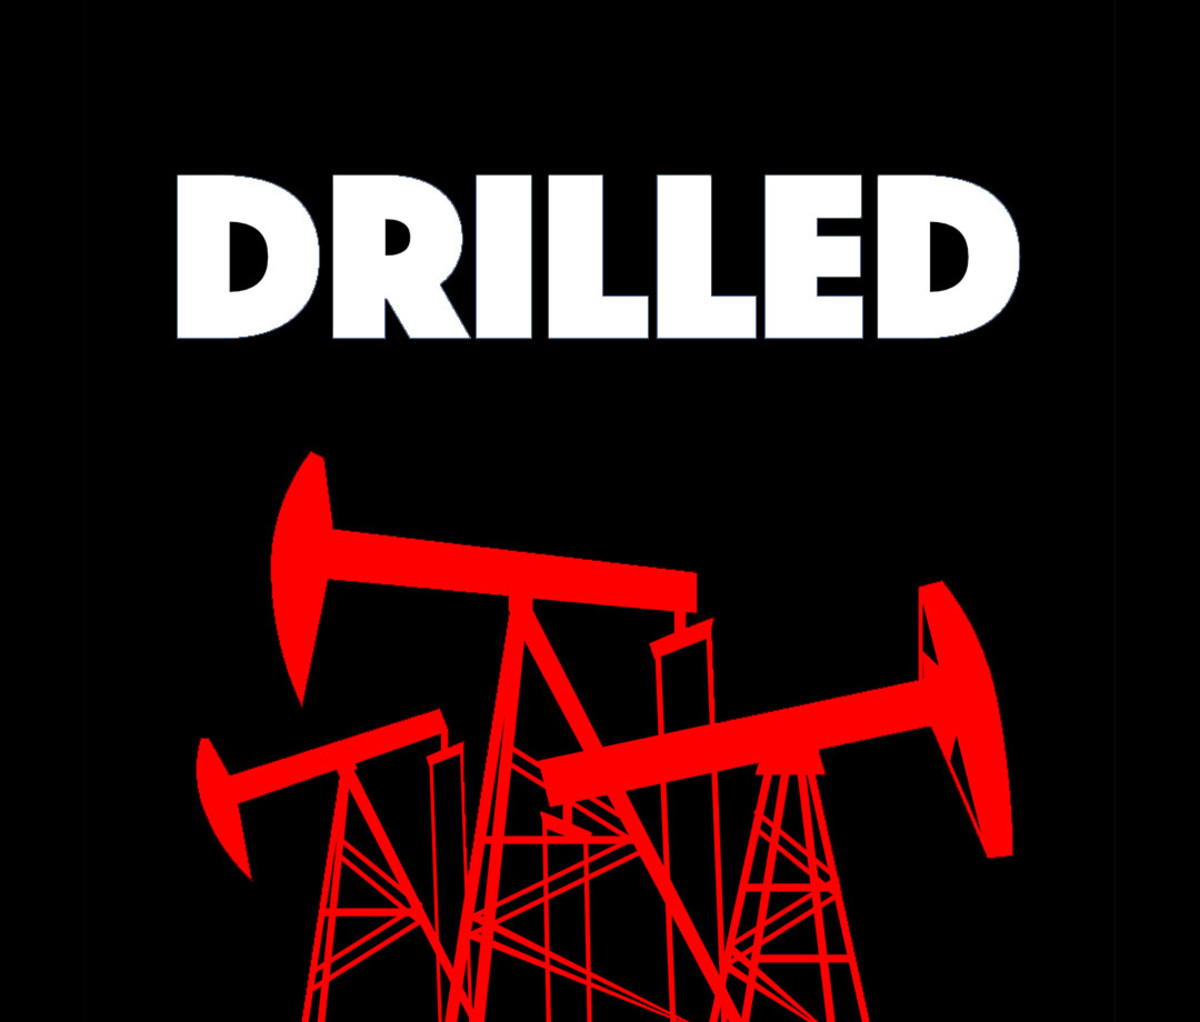 "Drilled"